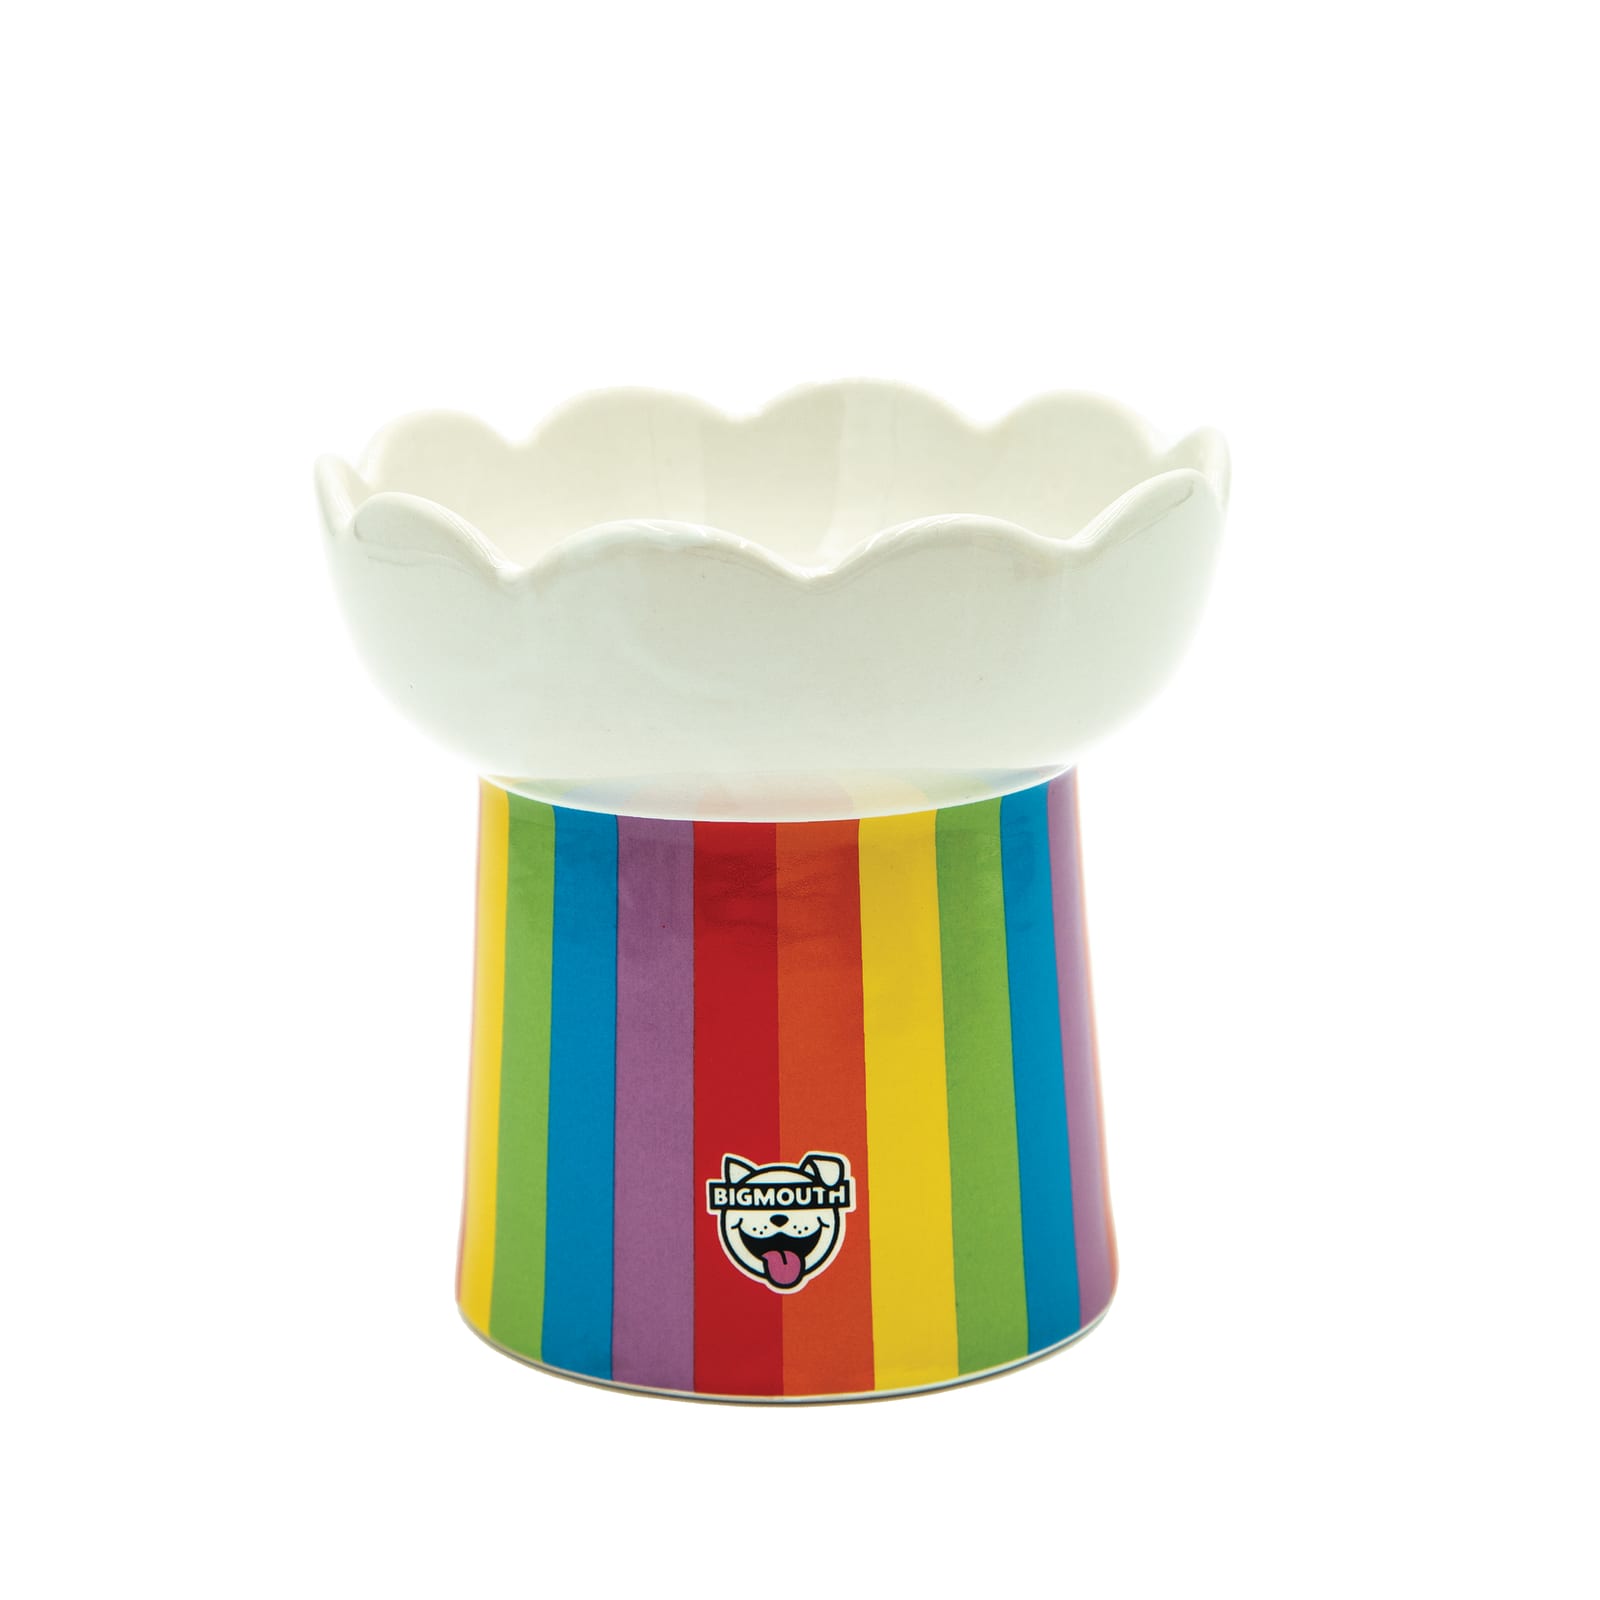 "Somewhere Over the Rainbow" Cat Bowl